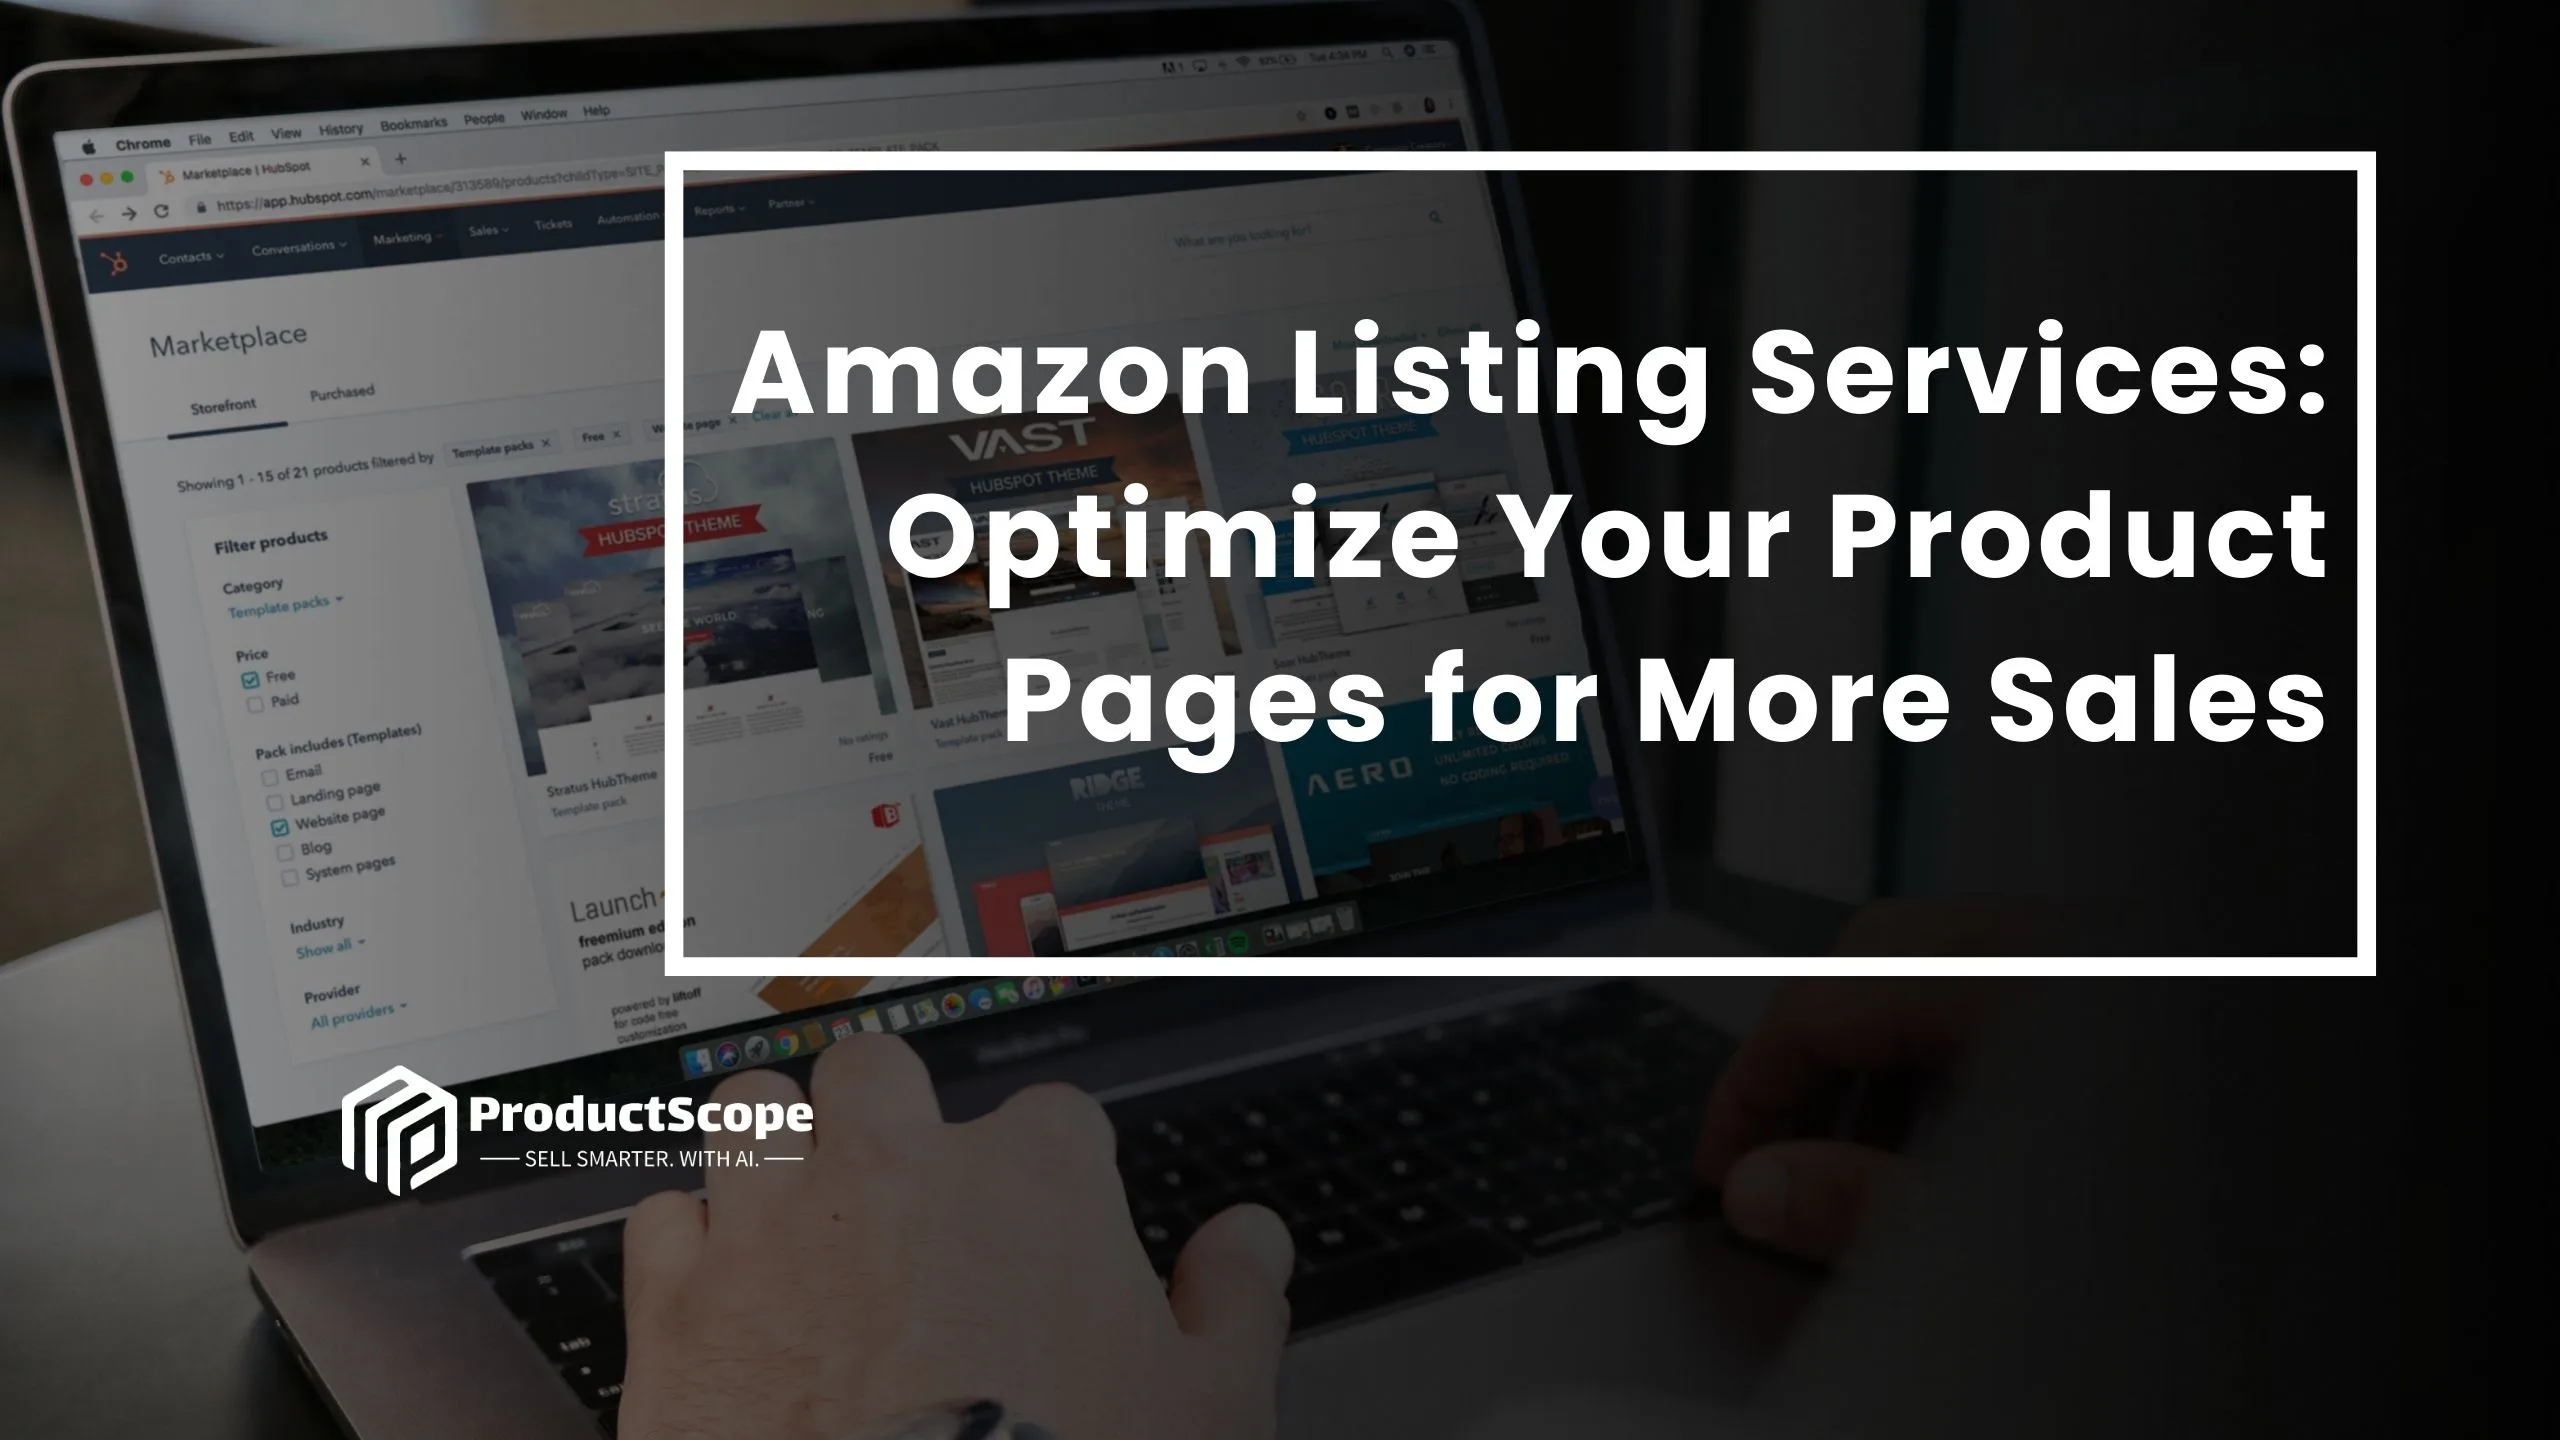 Amazon Listing Services: Optimize Your Product Pages for More Sales